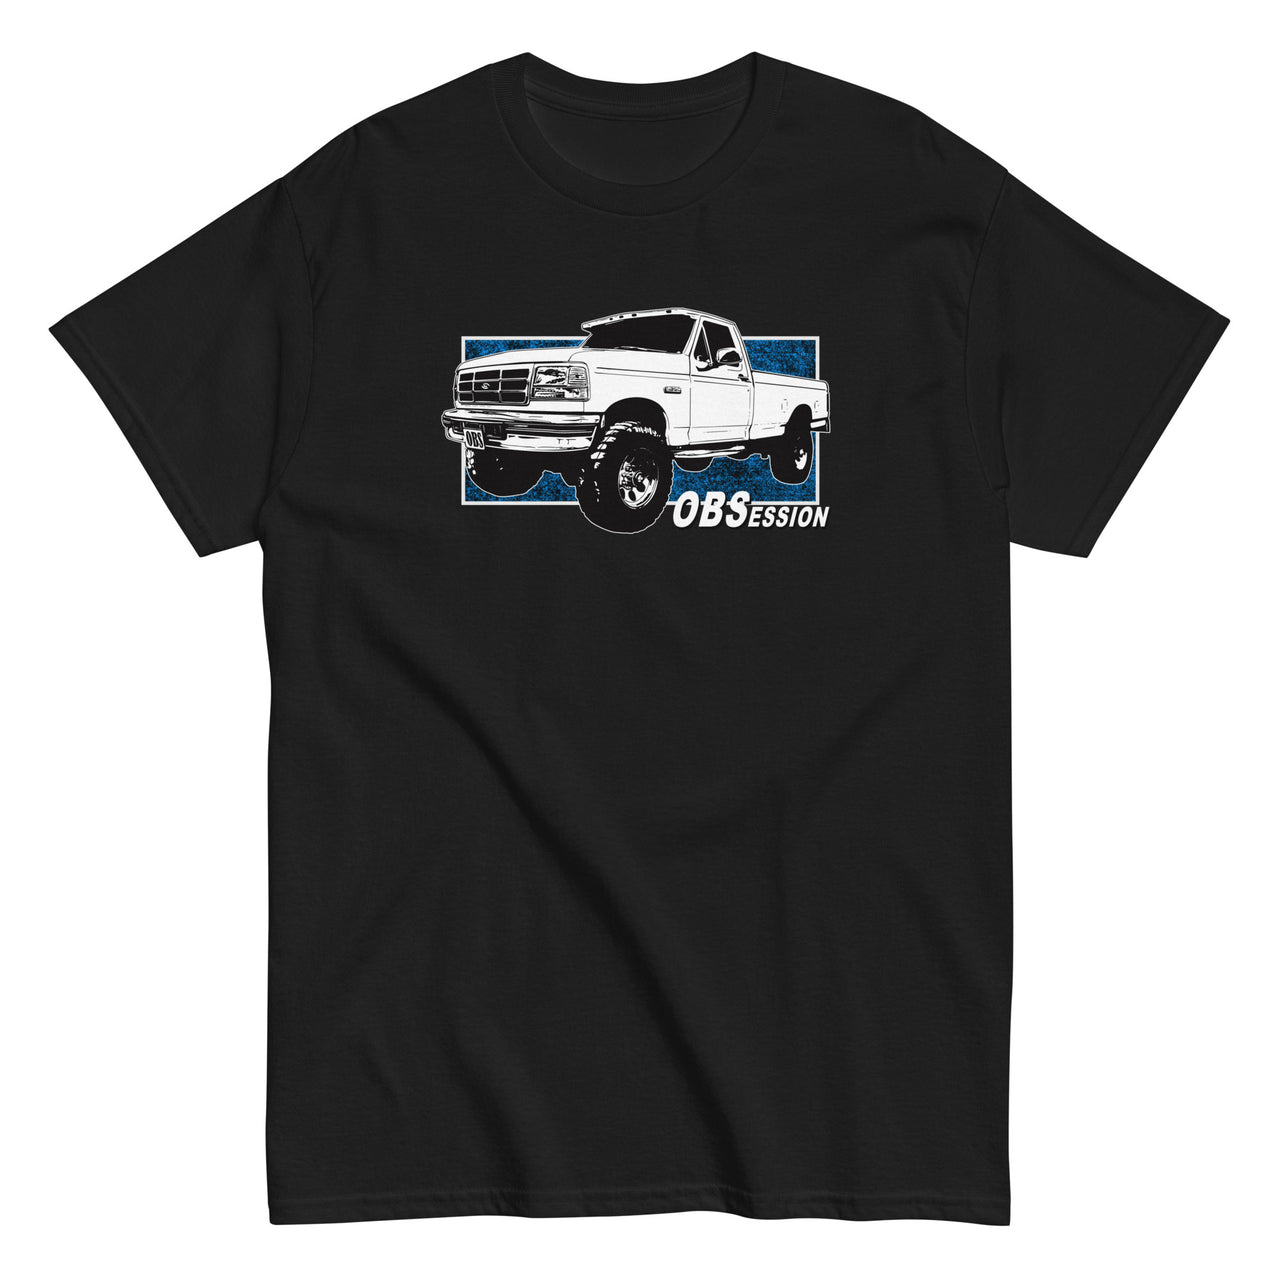 OBS Truck T-Shirt With Single Cab 90s Ford Truck - black